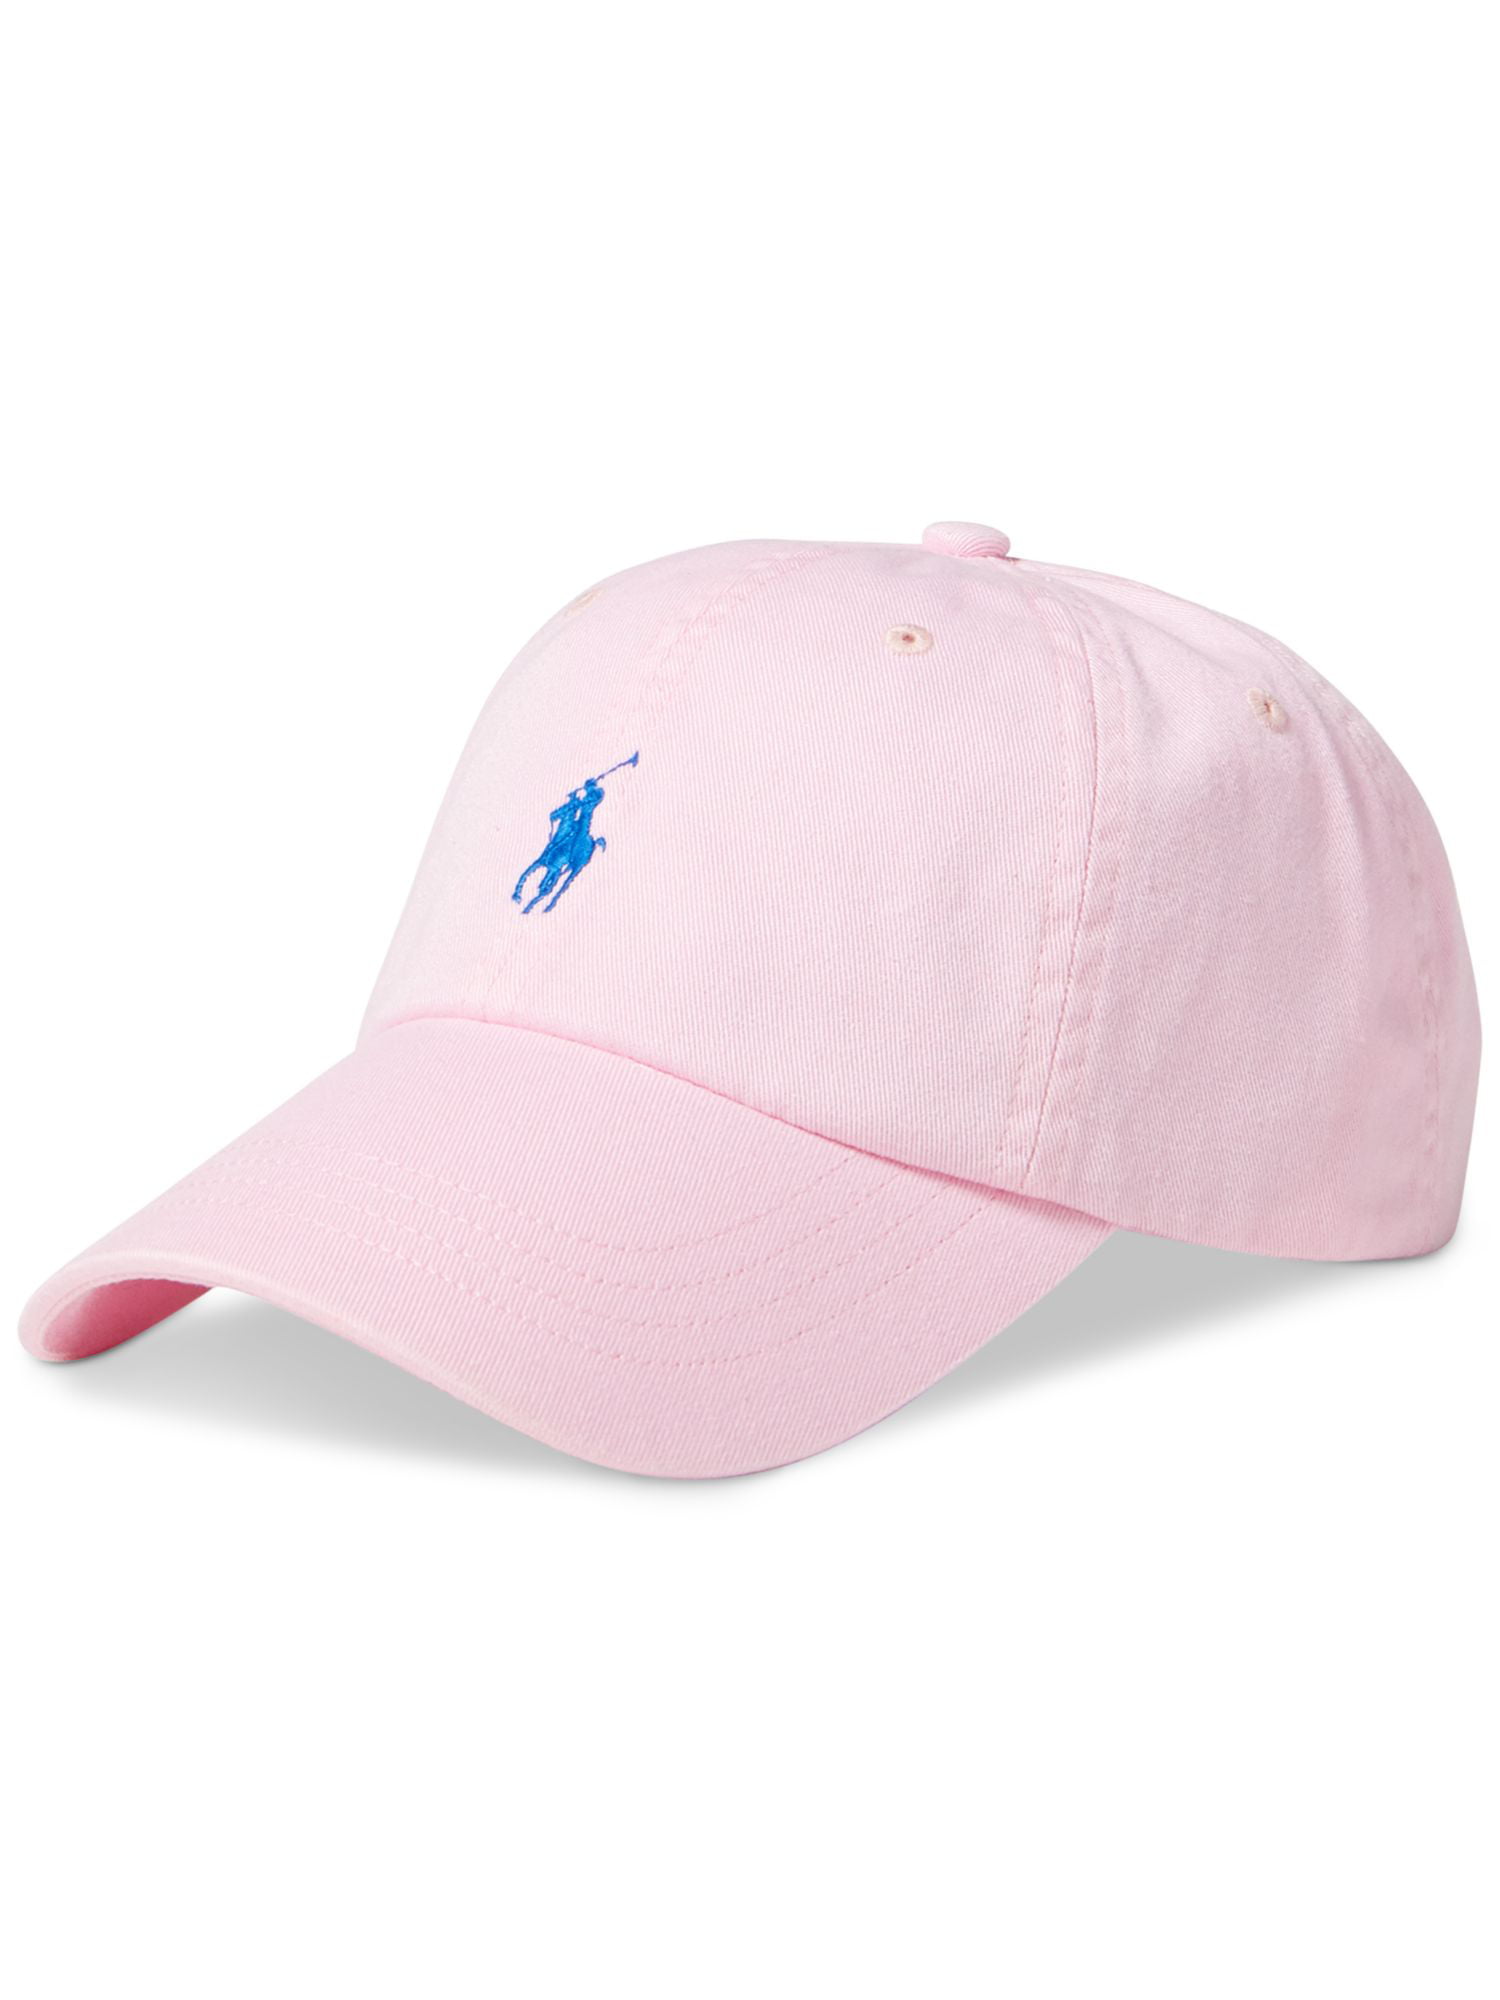 white and pink chimo cap birds child